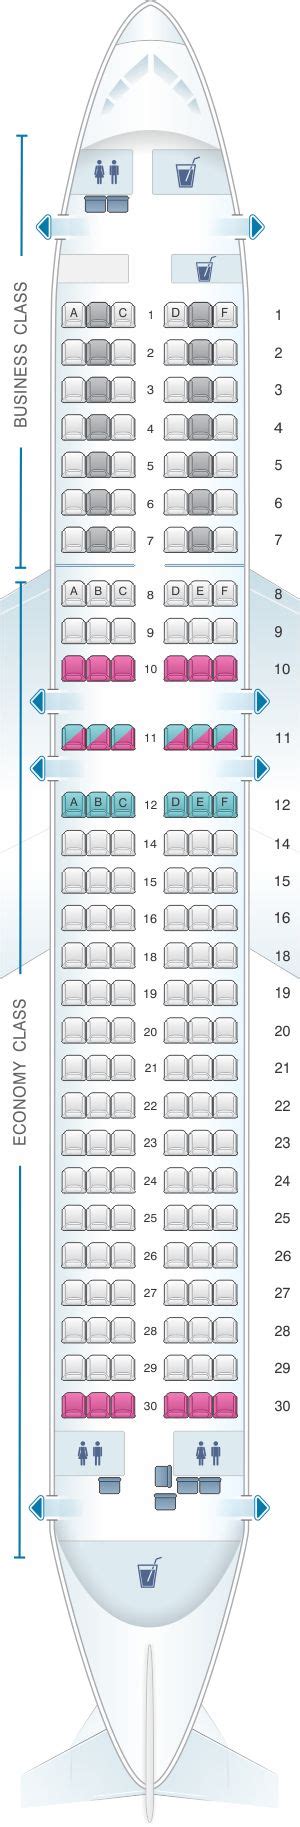 Seat Map Lufthansa Airbus A320 Asiana Airlines